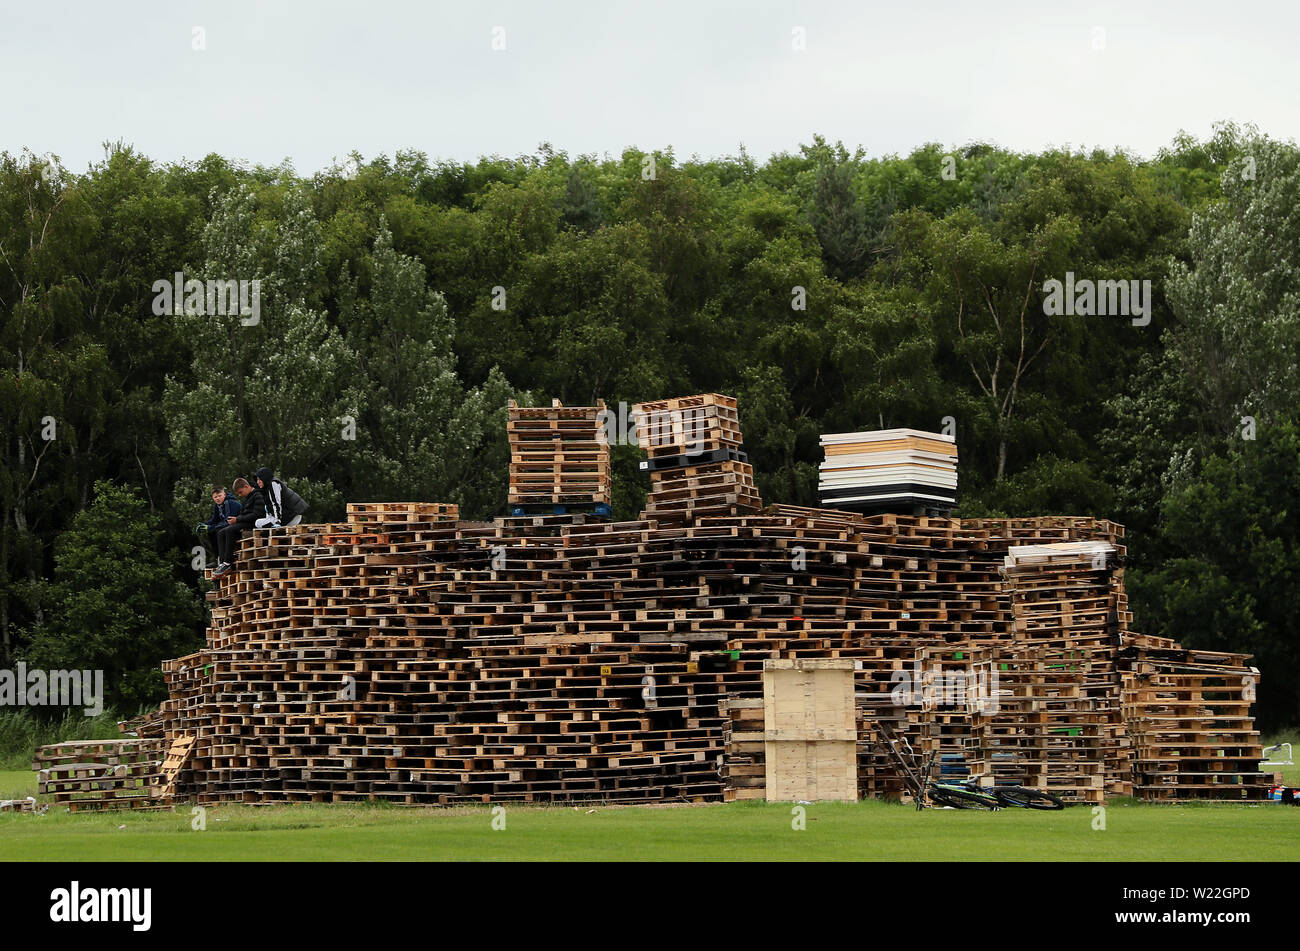 One of the contentious bonfires which is currently being erected at Inverary Playing Fields, as building continues on loyalist bonfires, which are traditionally lit on the 'Eleventh night' to usher in the Twelfth commemorations. Stock Photo